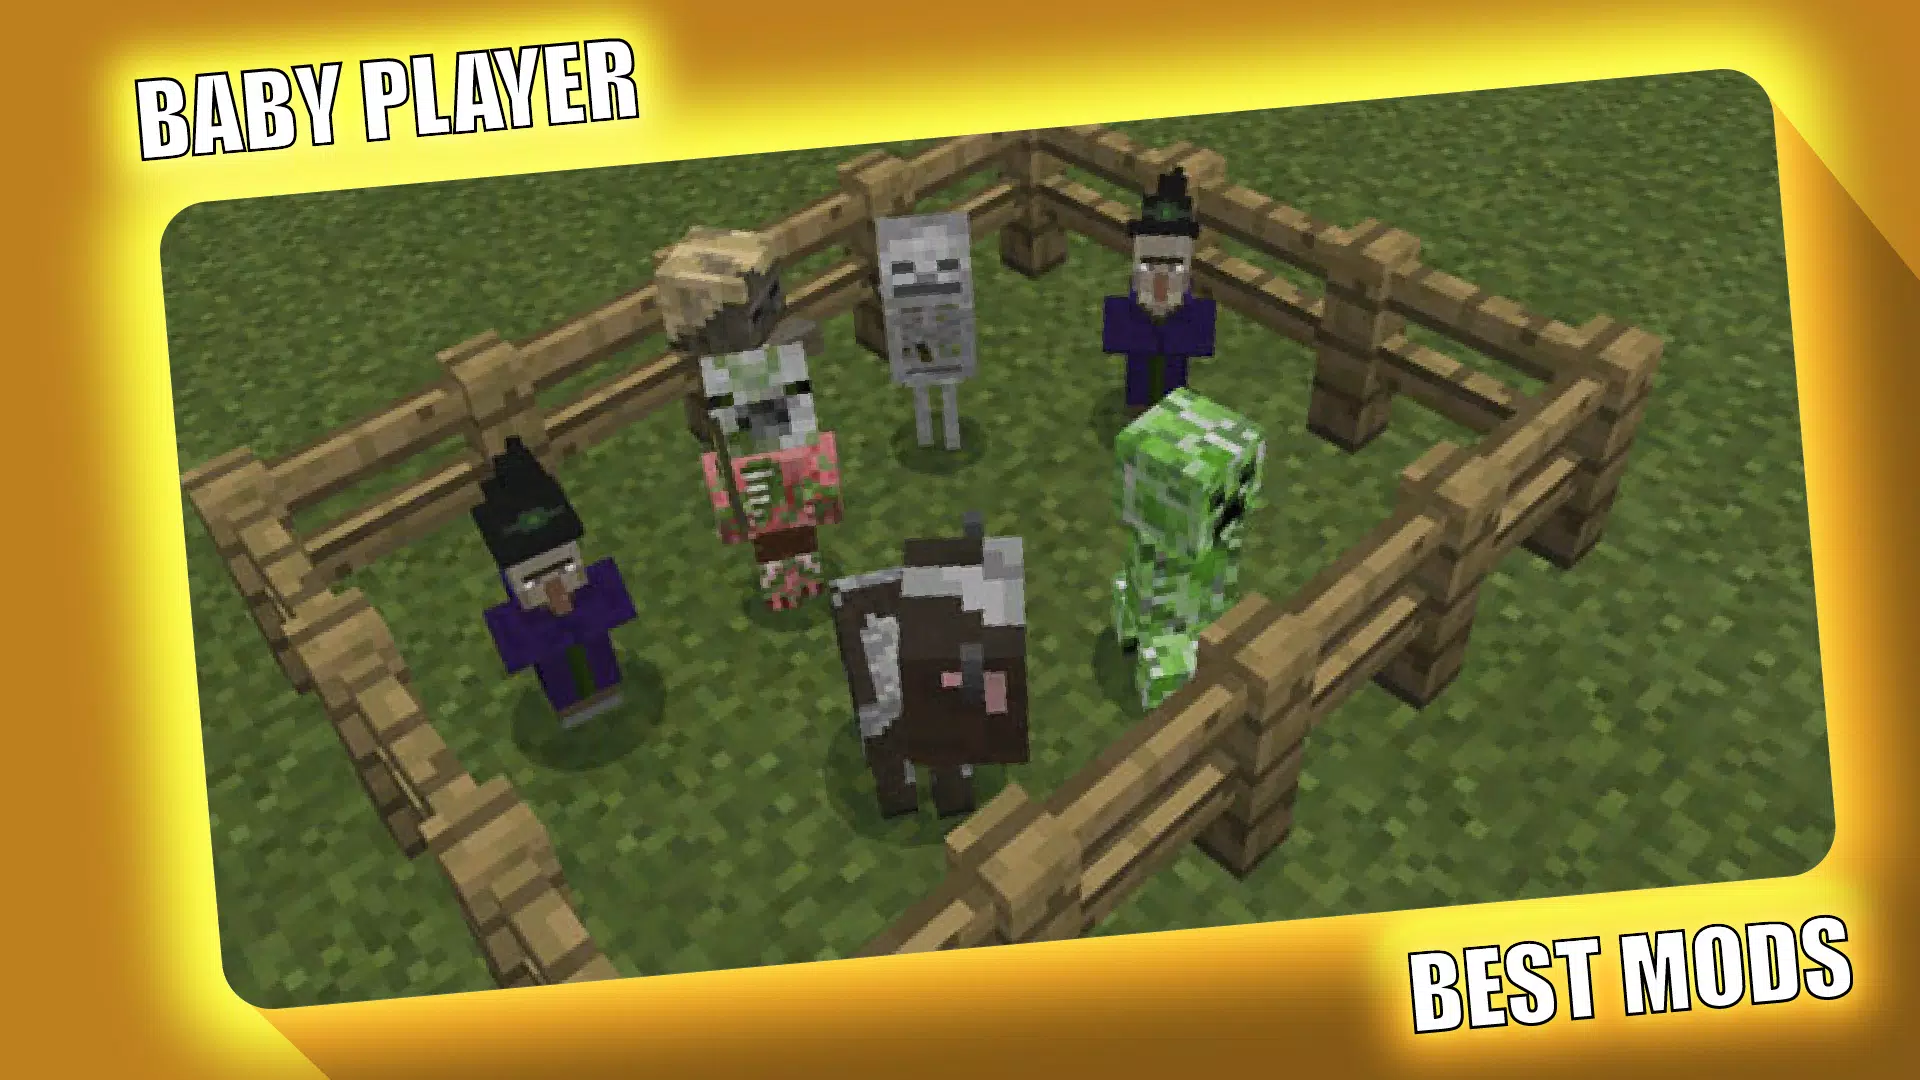 Download Player Model Mod For MCPE FREE android on PC